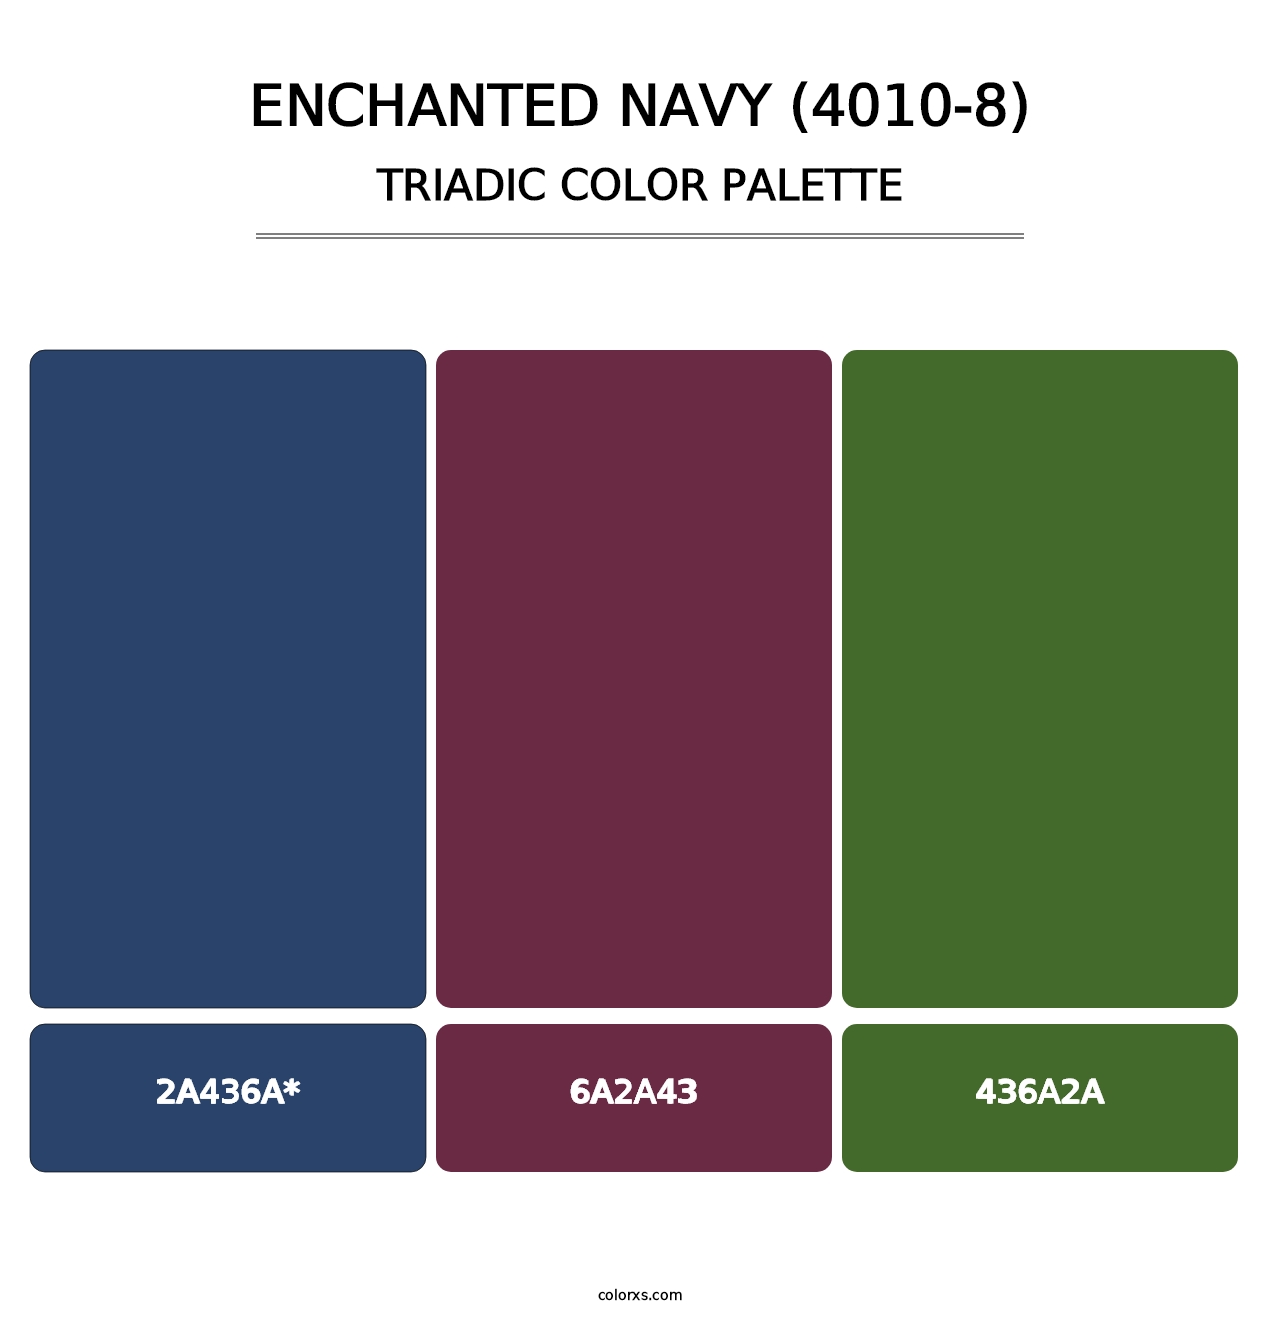 Enchanted Navy (4010-8) - Triadic Color Palette